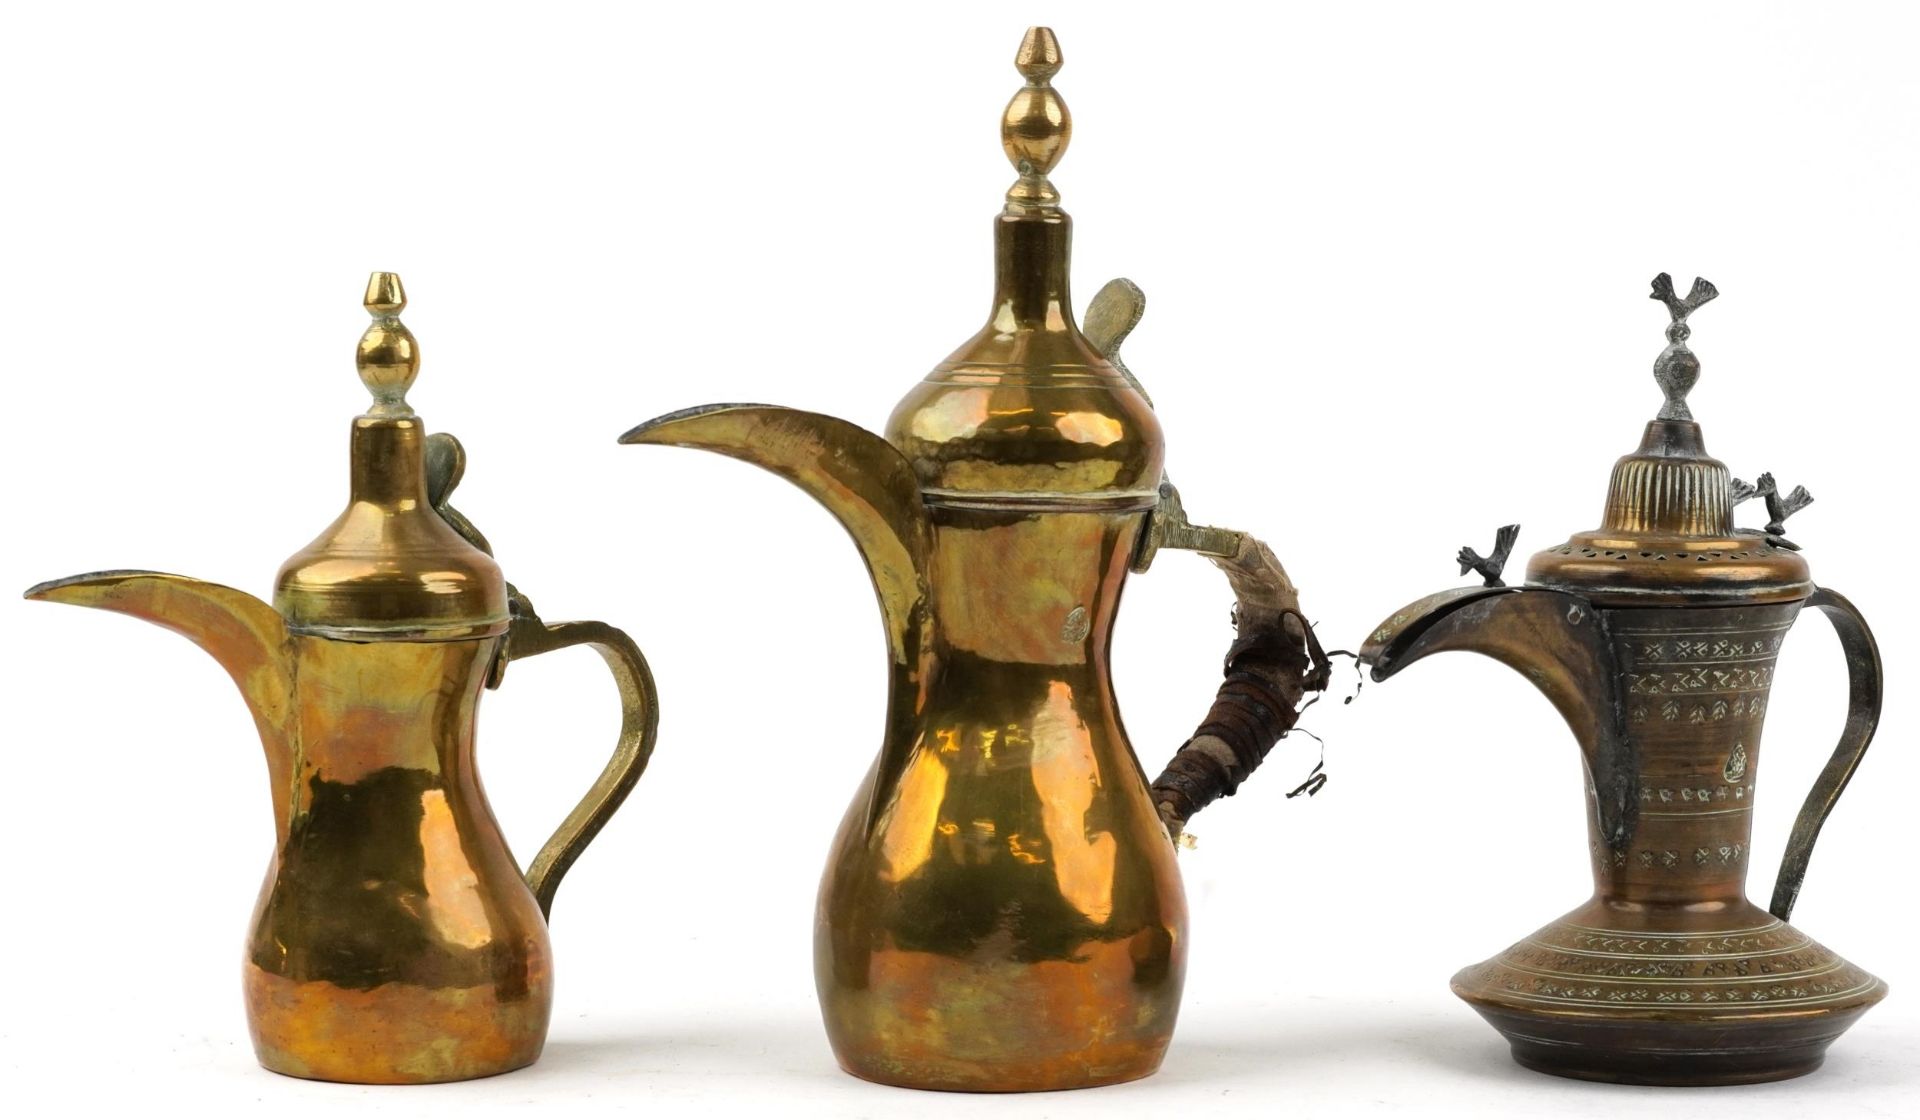 Three Omani brass dallah coffee pots including an example with bird knops, the two others with